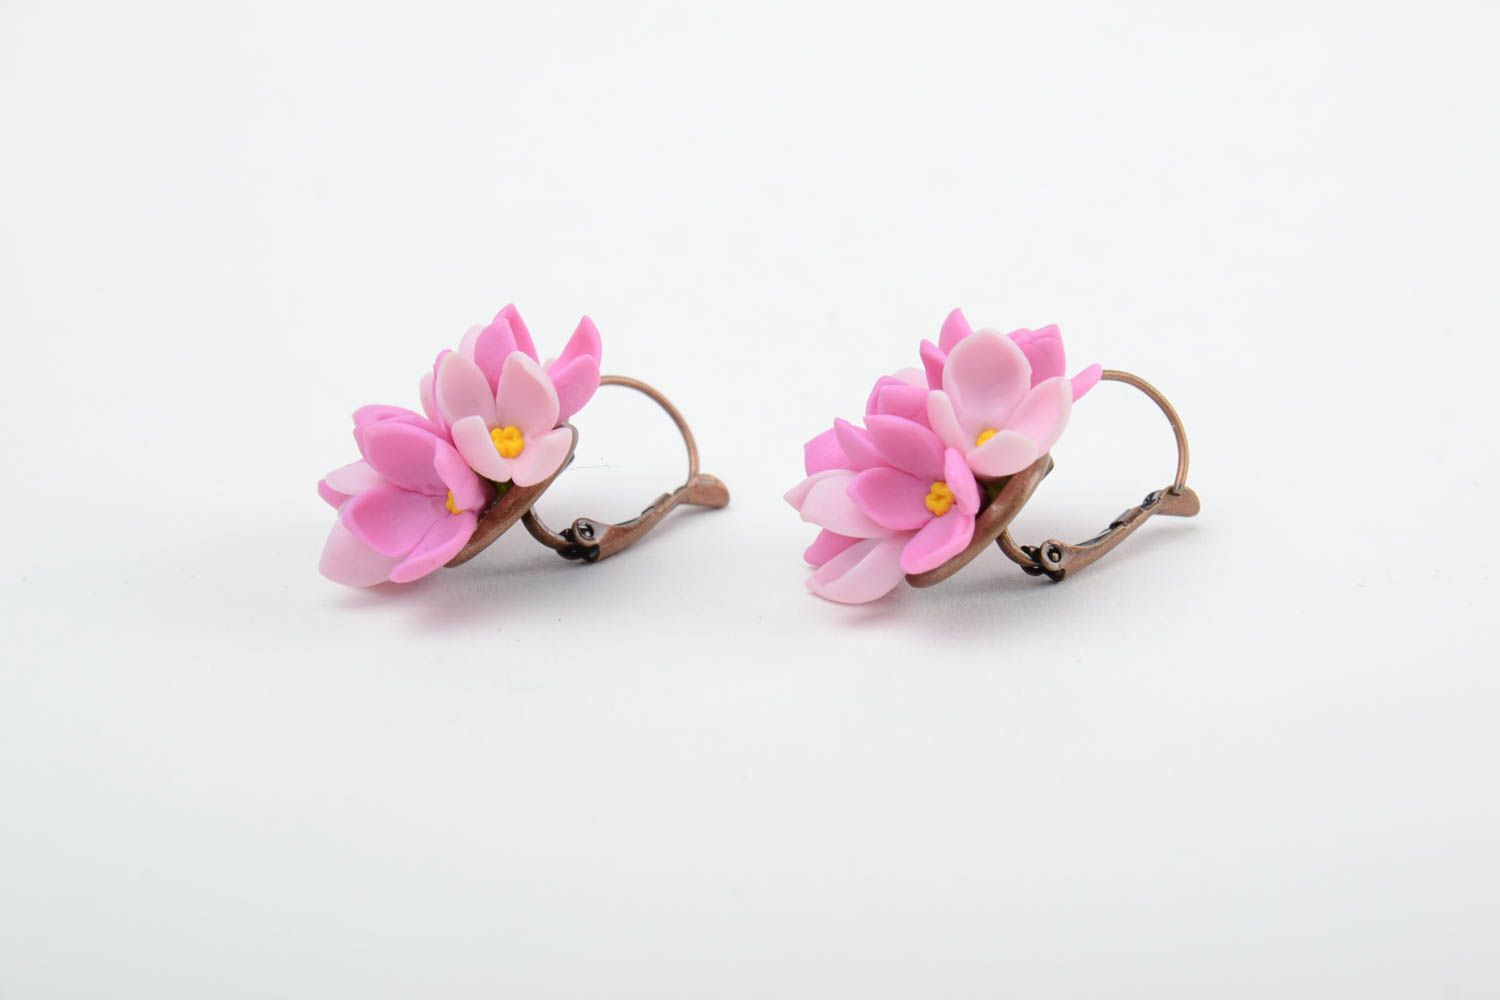 Handmade small festive earrings with tender pink cold porcelain lilac flowers photo 4